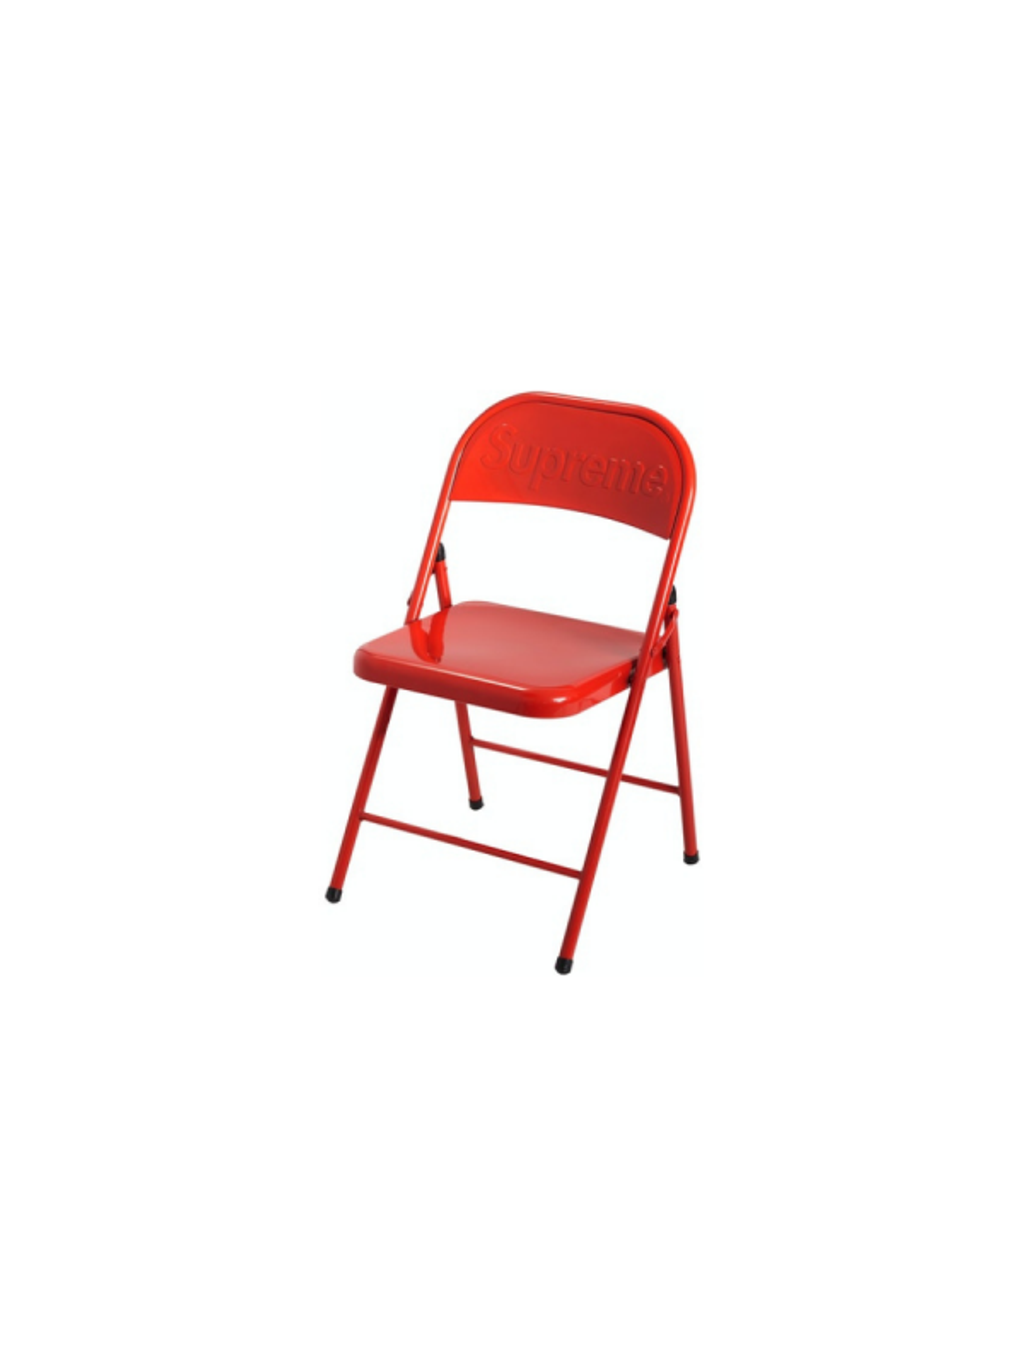 Supreme Metal Folding Chair Red – LIT UP 21